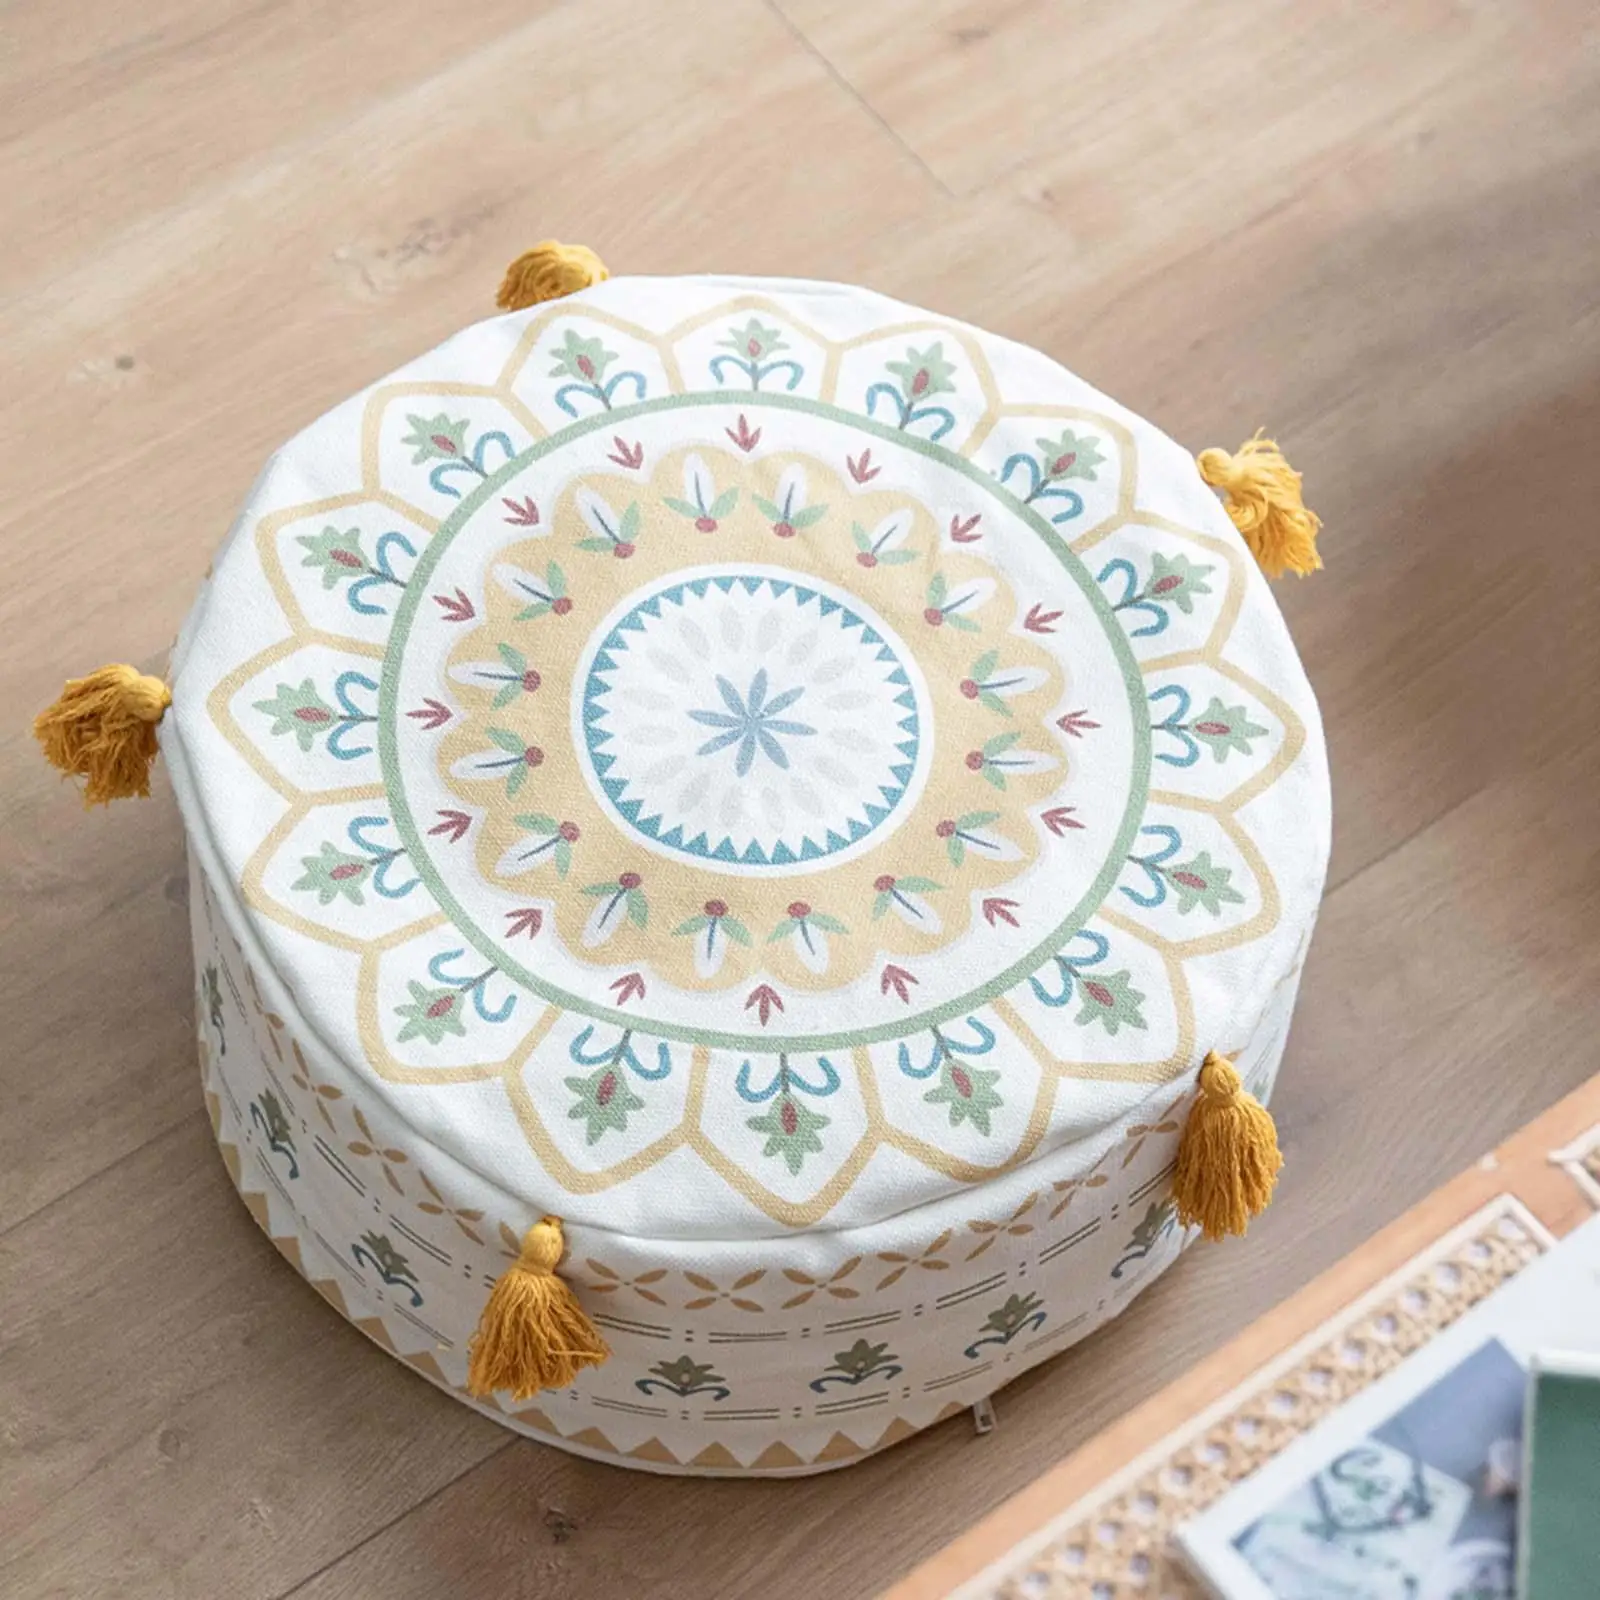 DIY Unstuffed Pouf Cover Footstool Cover Pouffe with Tassel for Patio Decoration